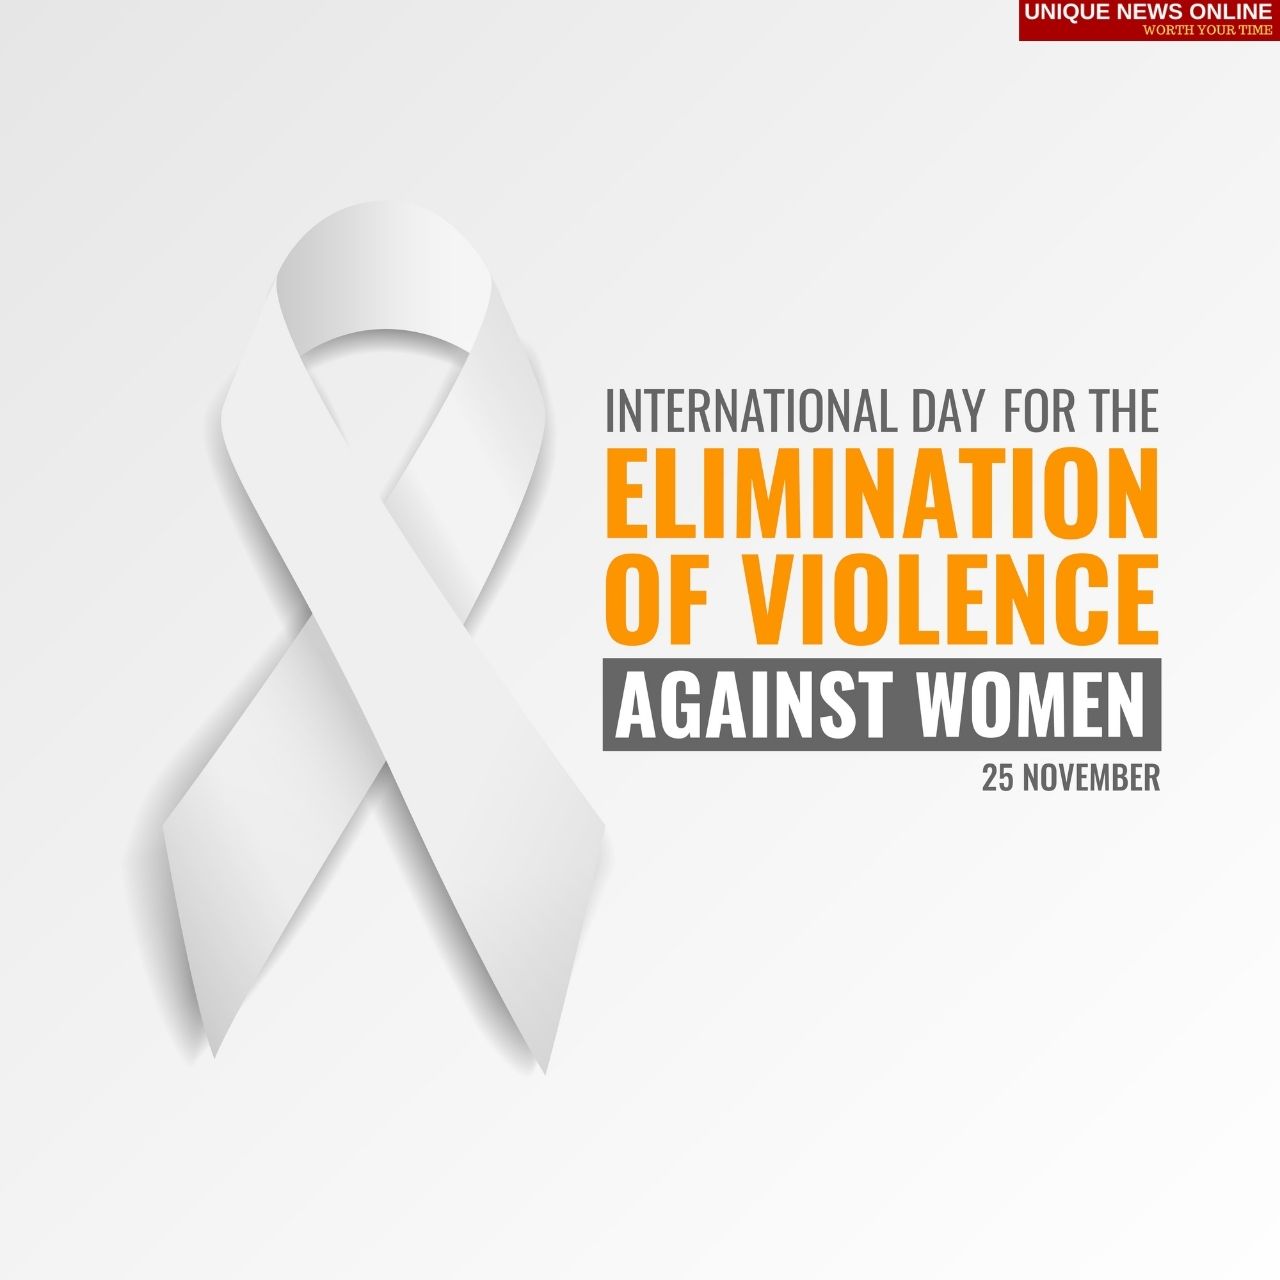 International Day for the Elimination of Violence against Women 2021 Quotes, HD Images, Messages, Poster and Slogans to create awareness